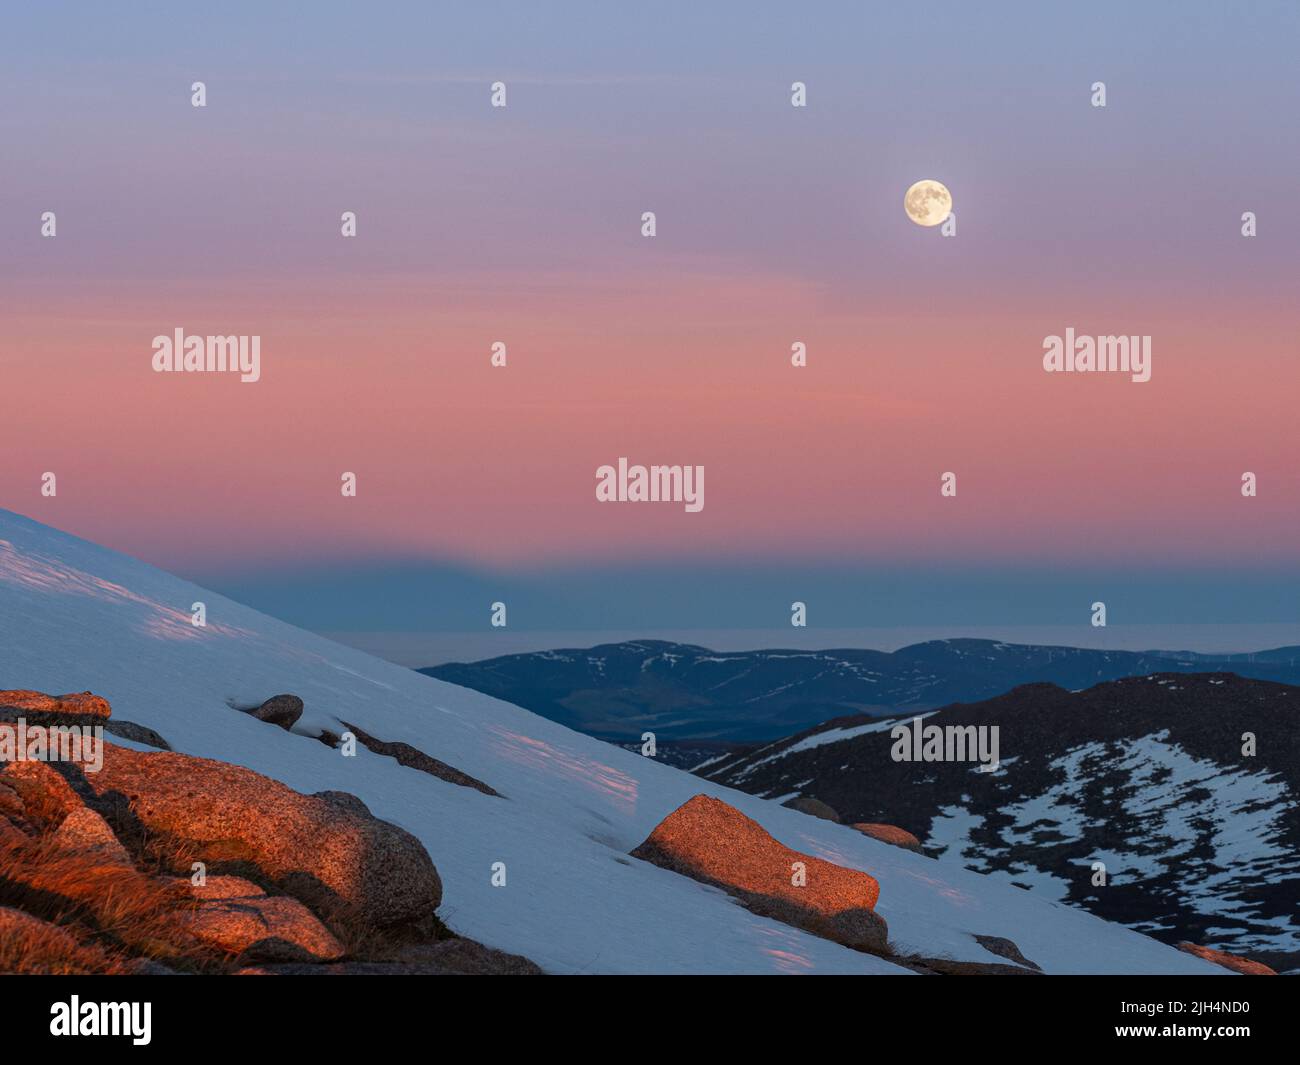 Cairngorms at sunset with colorful Belt of Venus and the rising moon in the sky during the winter season viewed from slopes of Carn Gorm Stock Photo